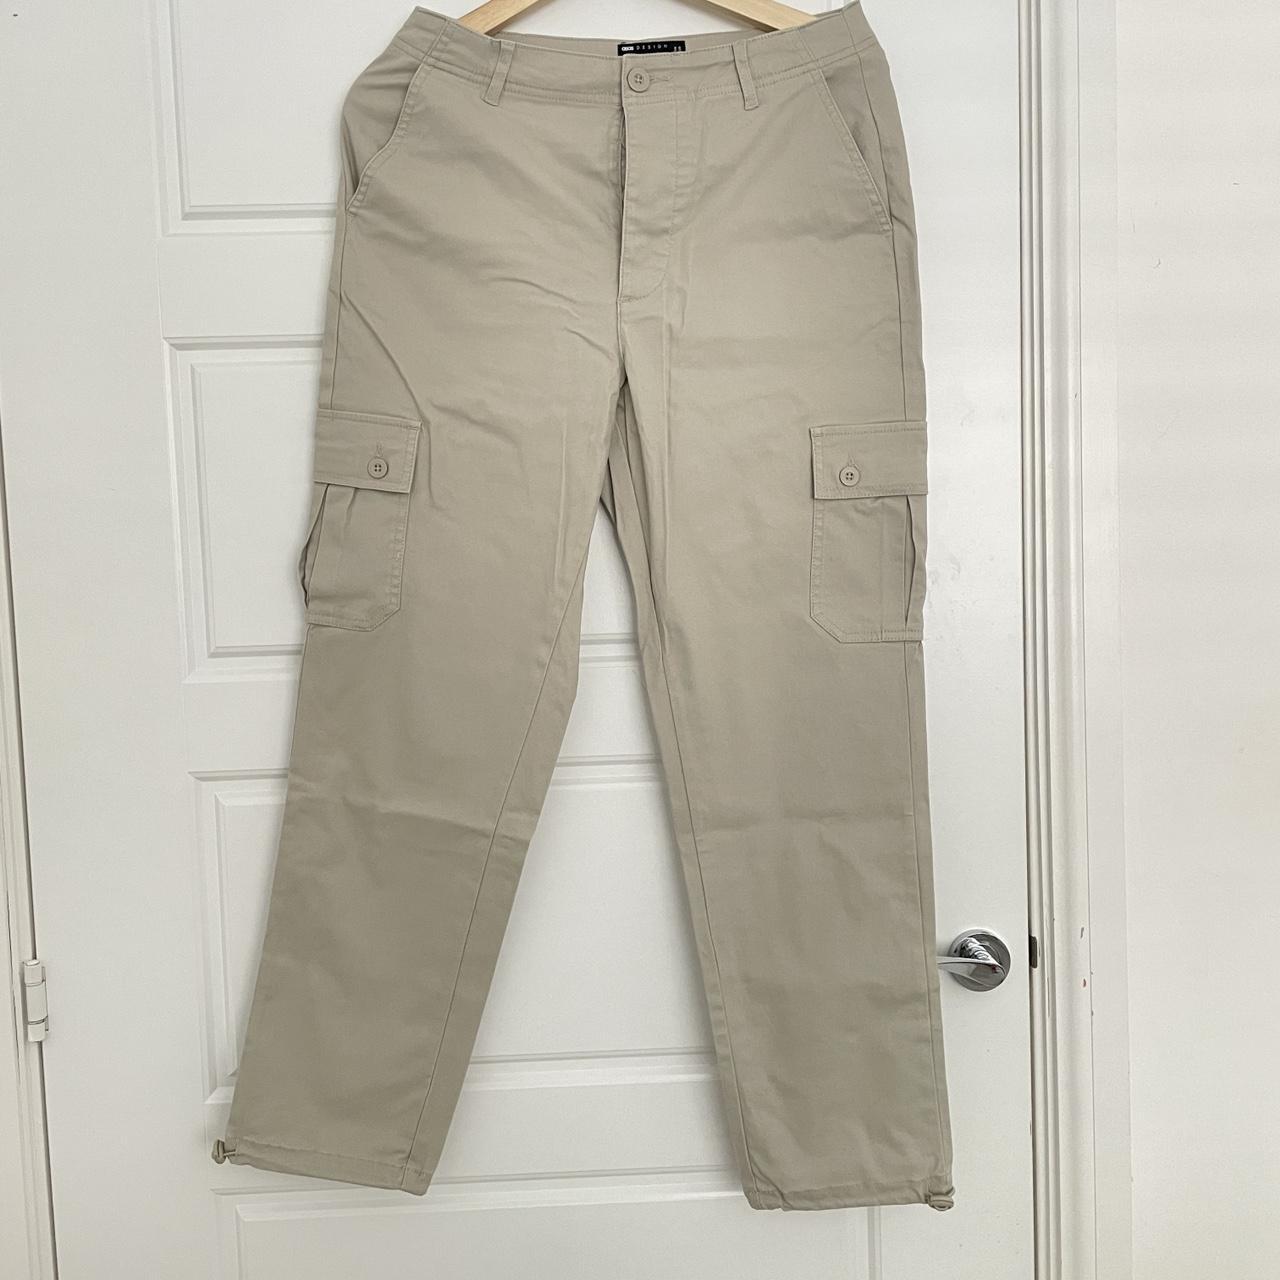 ASOS DESIGN Ecru Cargo Trousers with toggles at... - Depop